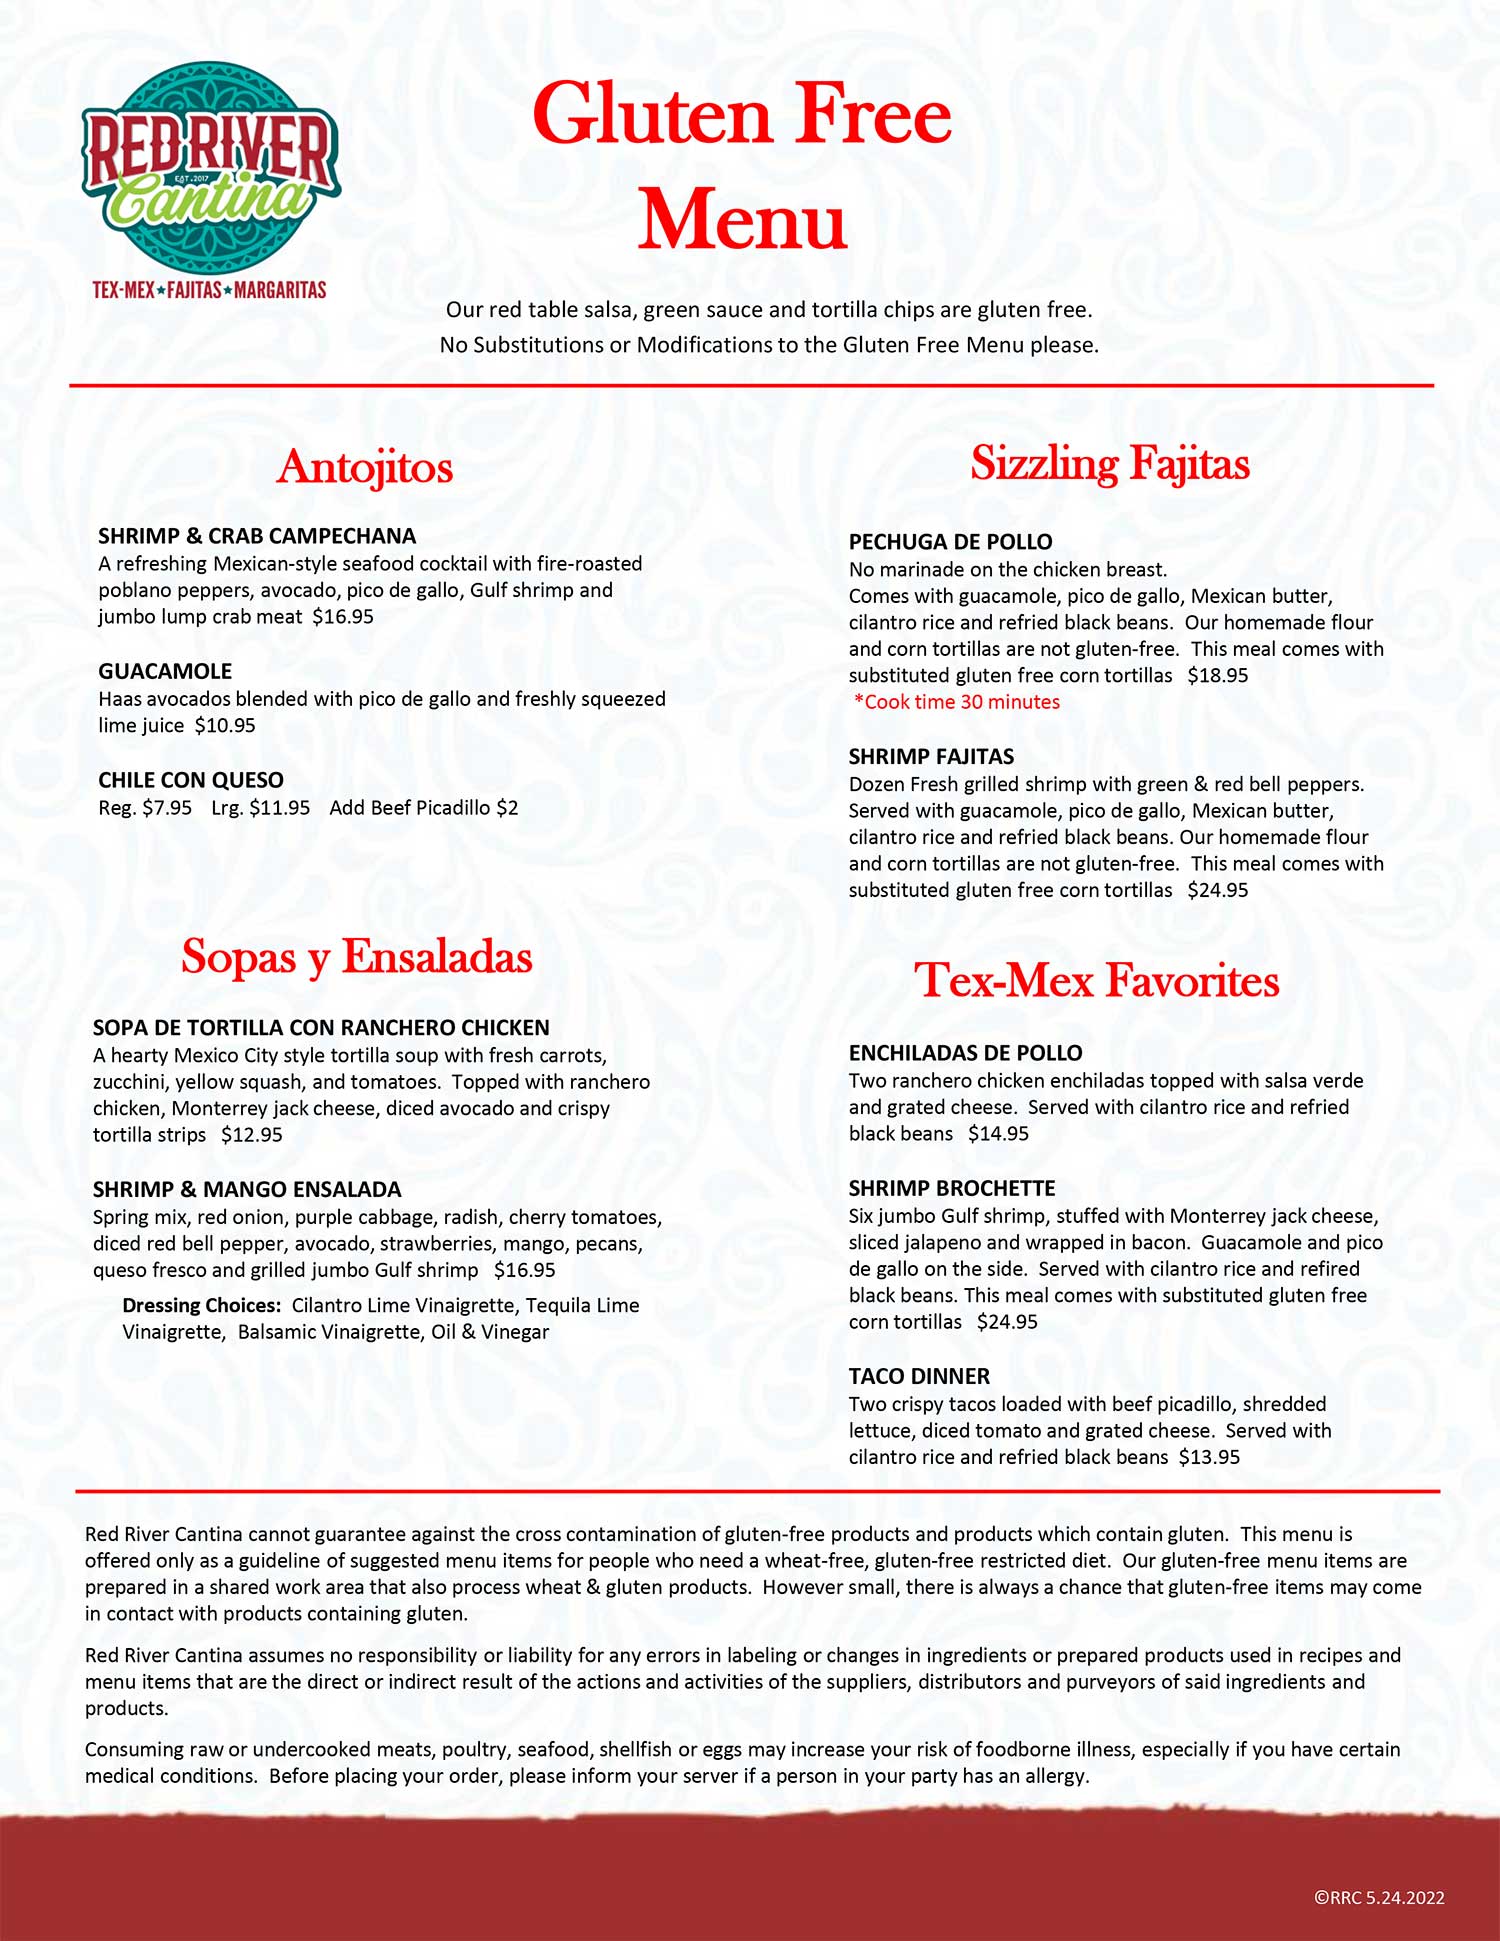 Gluten Free Mexican Dining